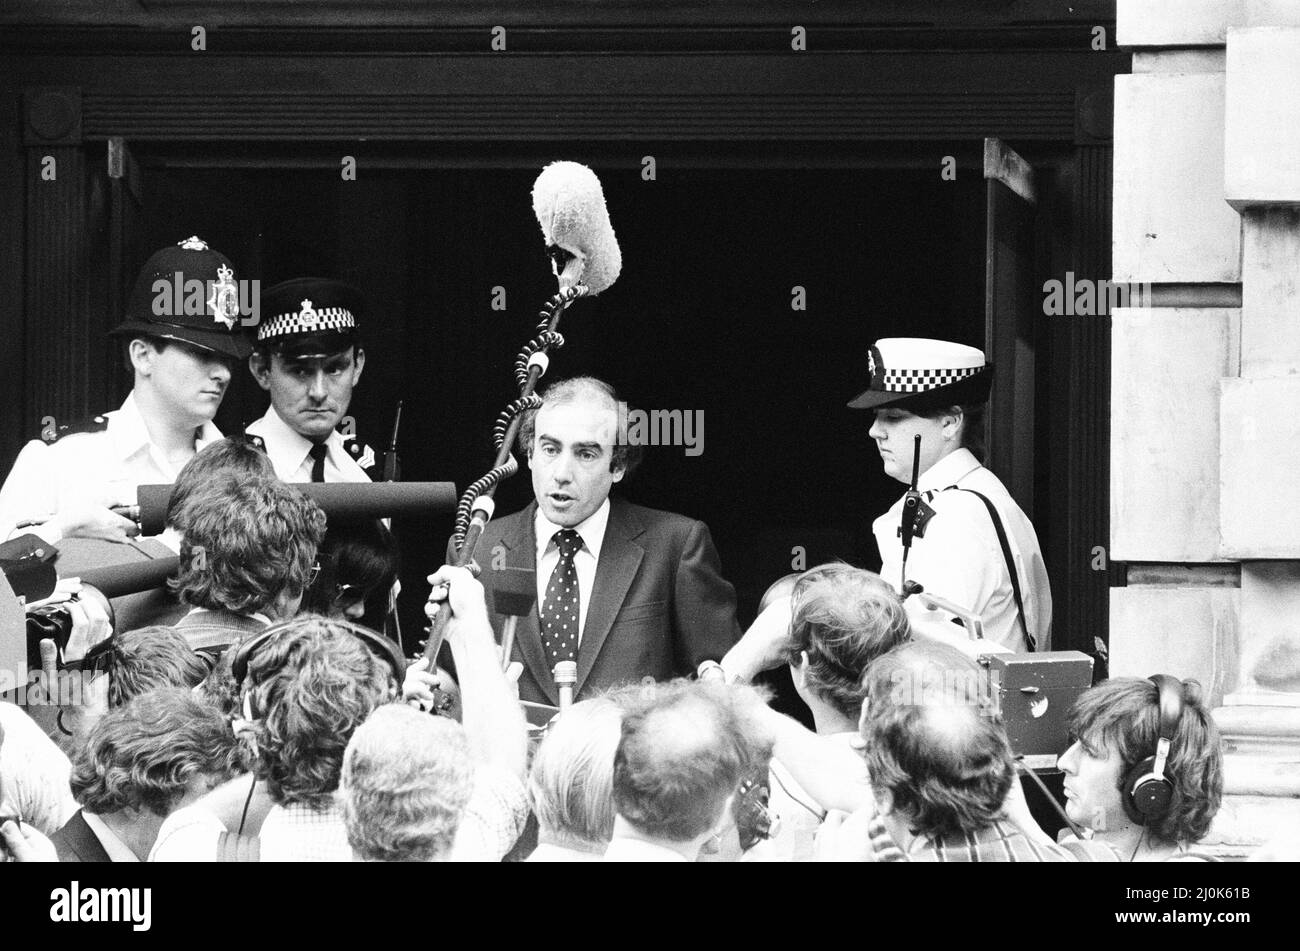 Scenes outside hospital, The National Hospital for Neurology and Neurosurgery, Queen Square, London, Friday 4th June 1982. Our Picture Shows ... spokesman holds a press conference on the steps of the National Hospital.  This is where Shlomo Argov, the Israeli ambassador to the United Kingdom was taken after attempted assassination the previous evening.    Shlomo Argov was shot in the head  as he got into his car after a banquet at the Dorchester Hotel, in Park Lane, London.   Argov was not killed, but he was critically injured.  The attempt on Argov's life was used by Israel as grounds for the Stock Photo